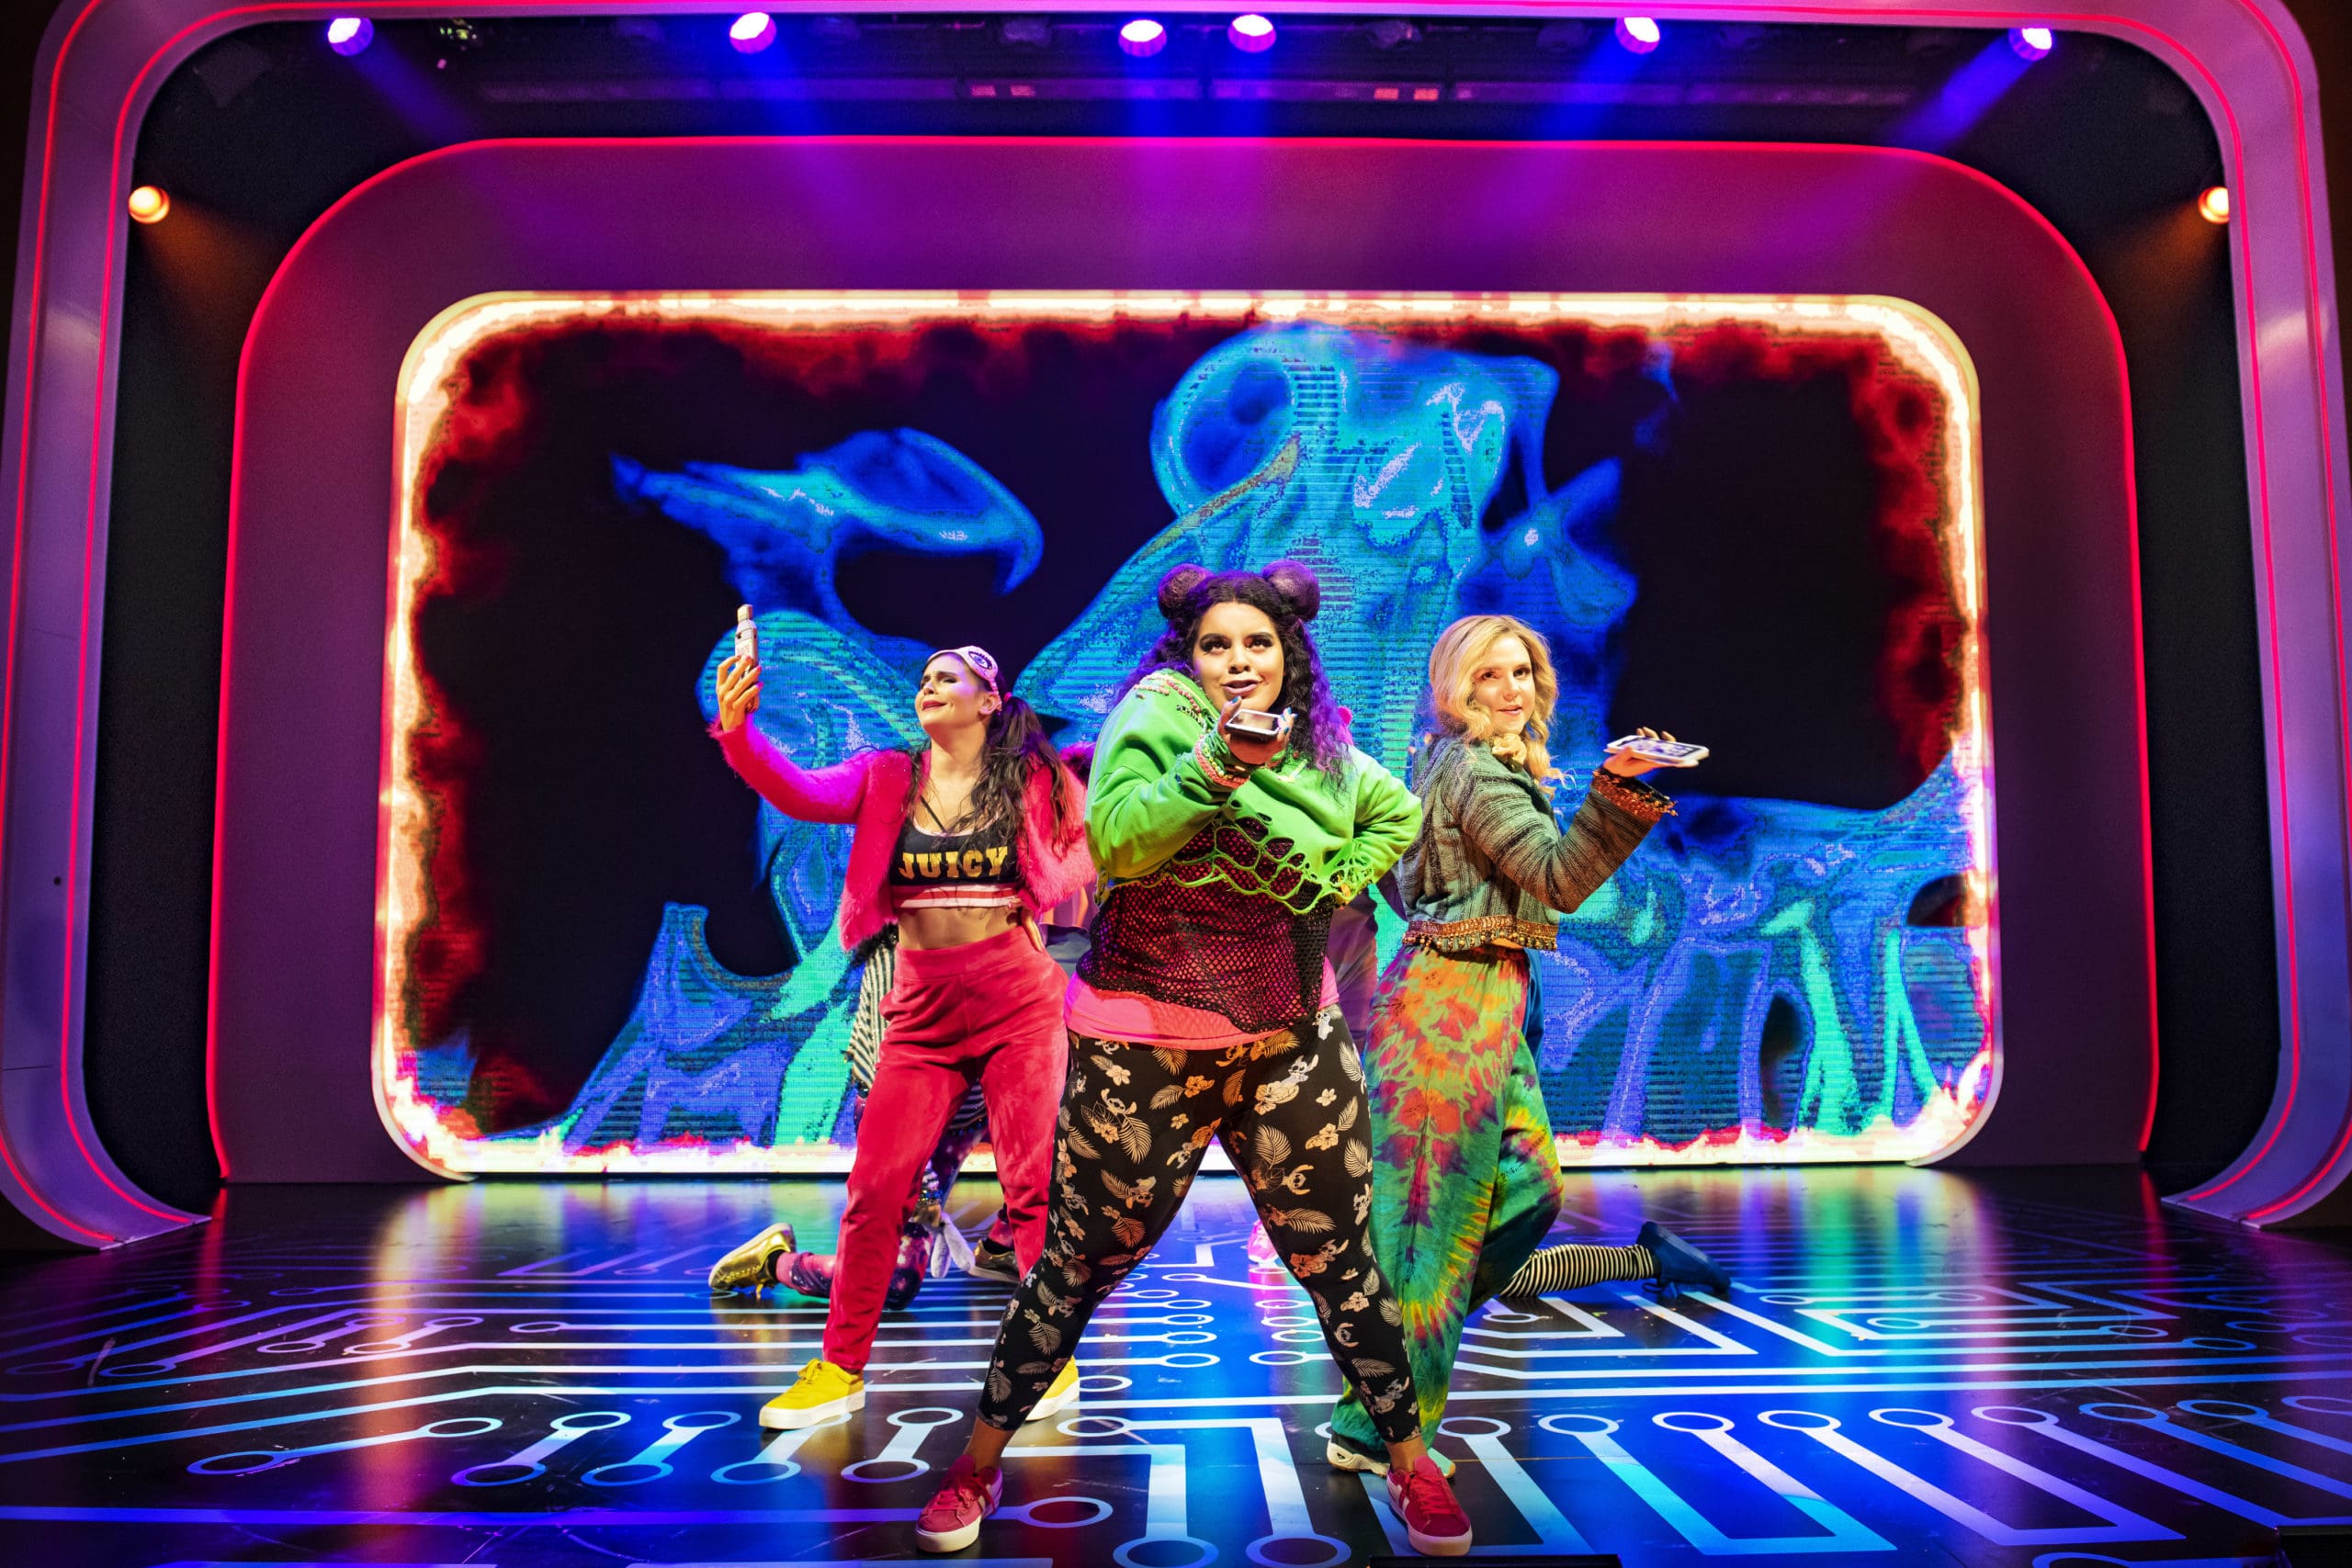 FIRST LOOK: Production shots released of Be More Chill